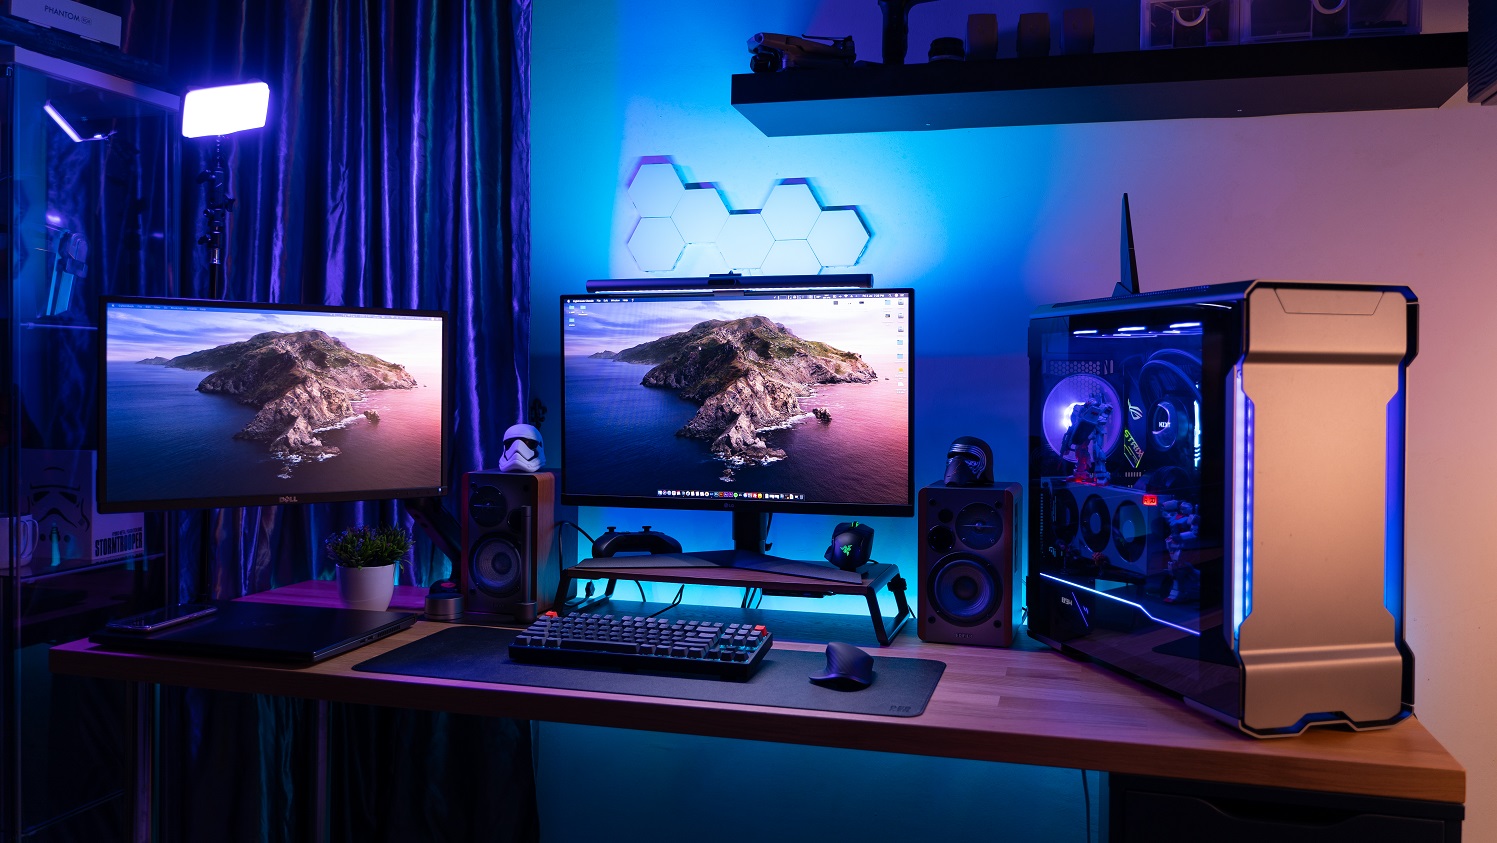 Put a light bar above the monitor to light up my desk area a bit, happy  with how it looks! Any suggestions? : r/battlestations